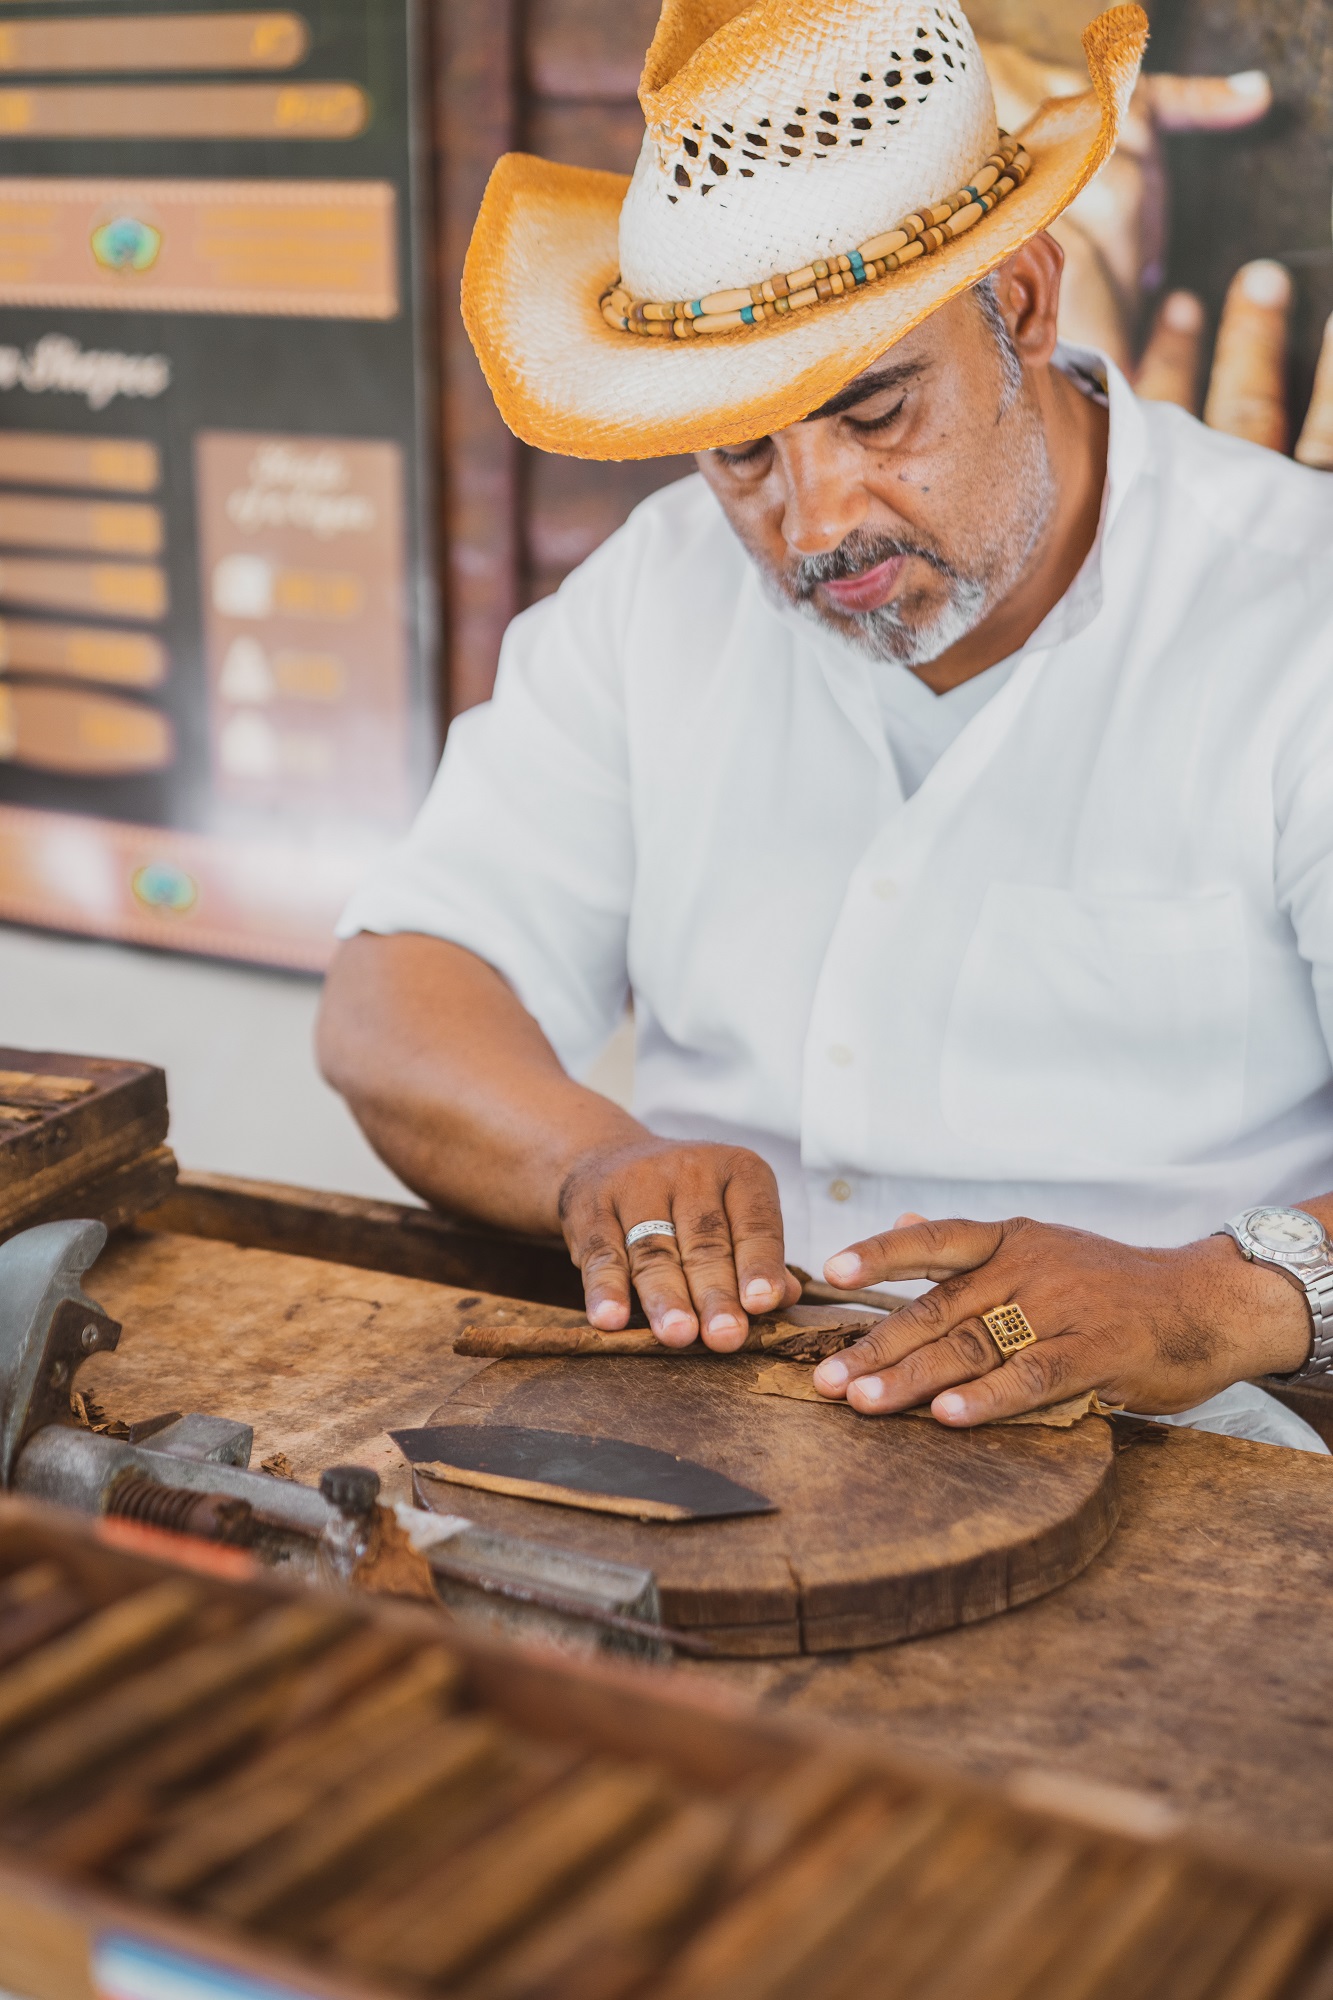 Cigars in Dominican Republic - things to do in the Dominican Republic